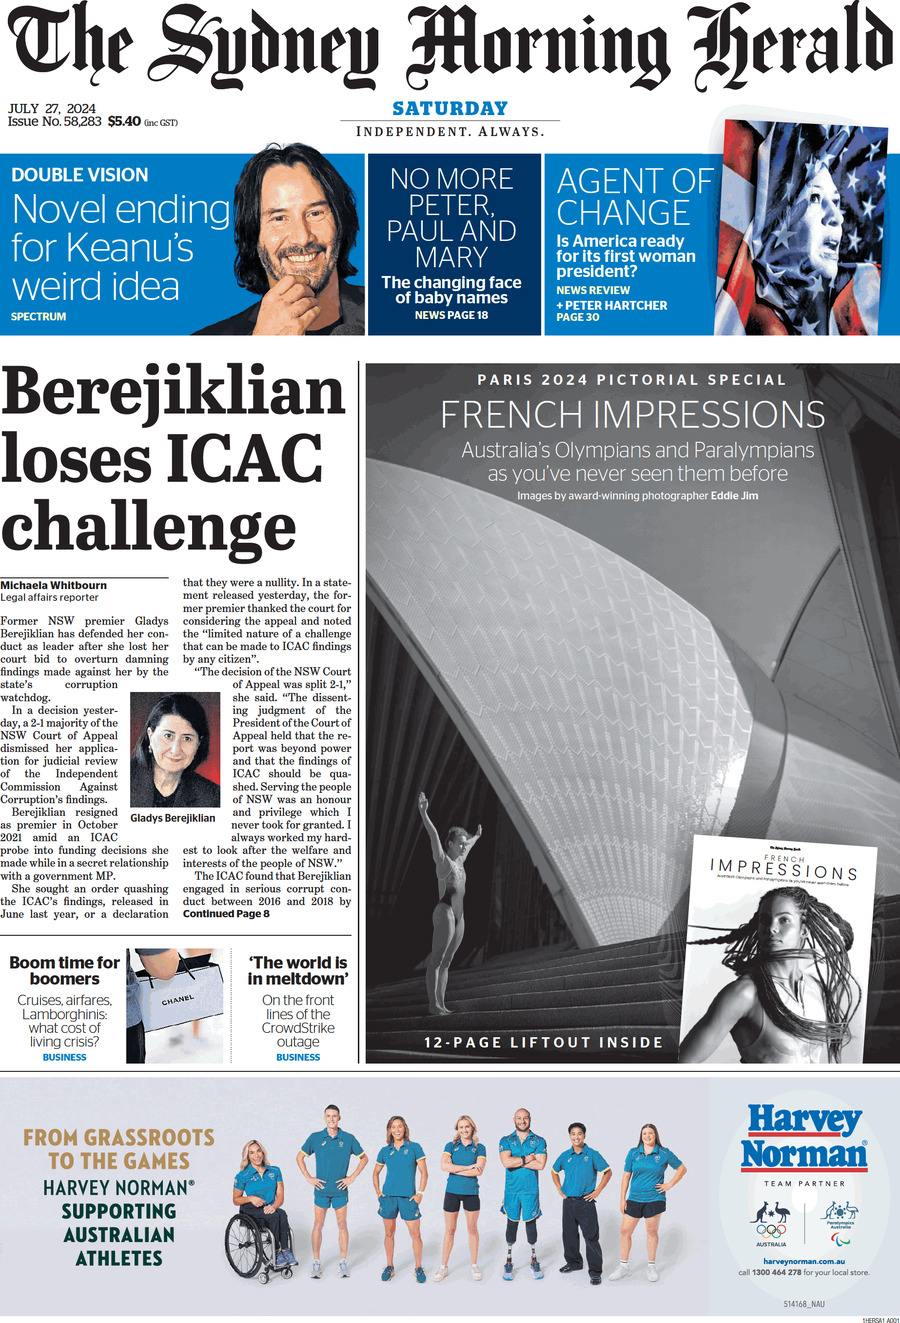 The Sydney Morning Herald - Front Page - 07/27/2024